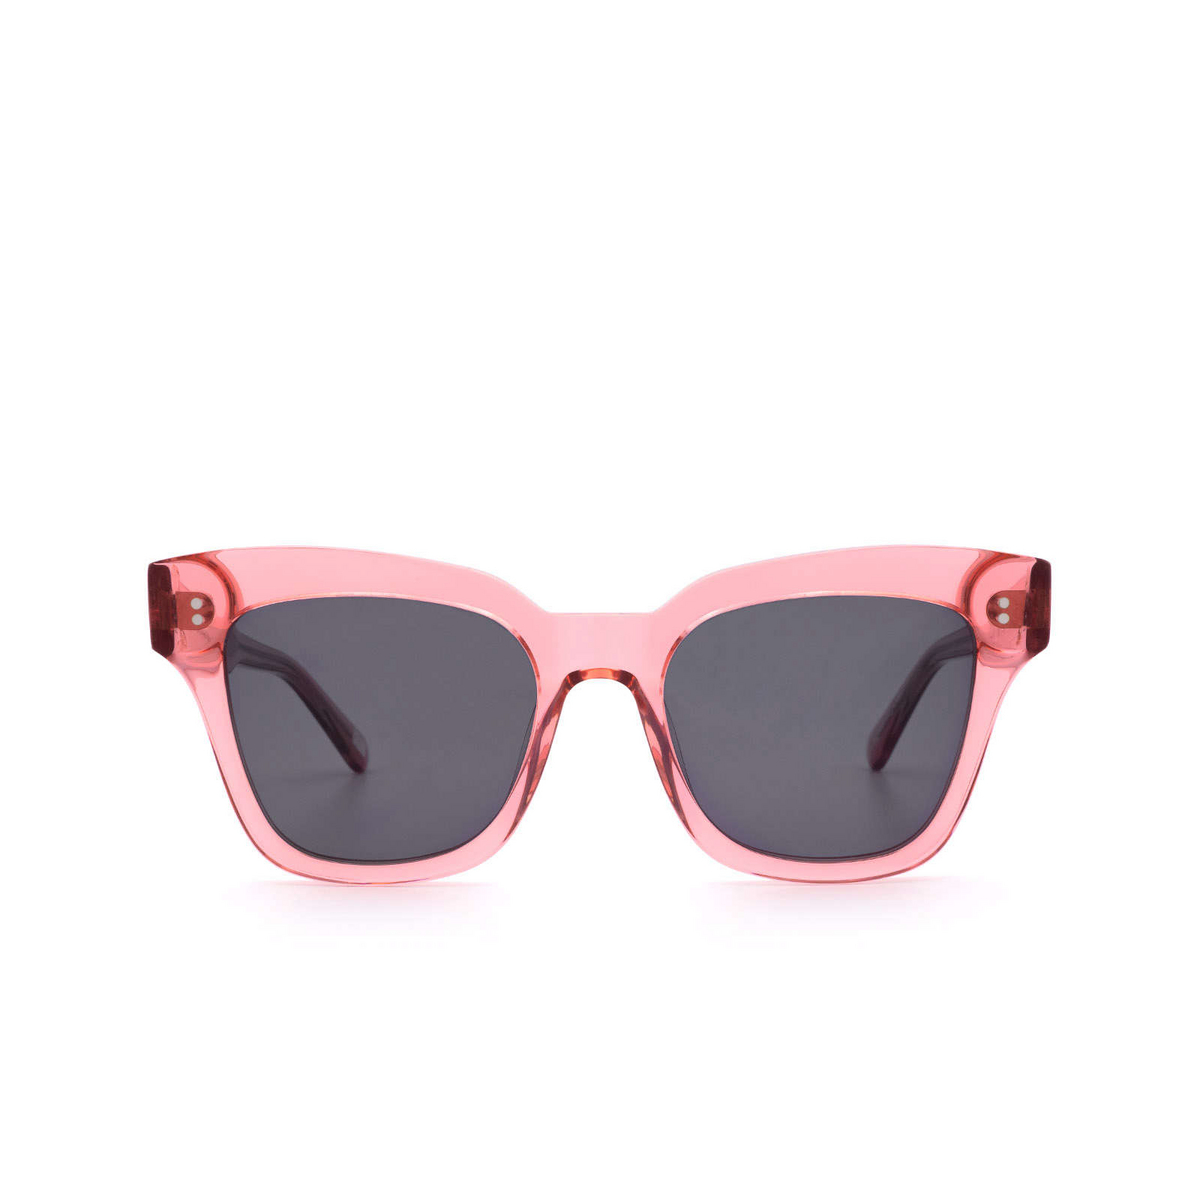 Chimi #005 Sunglasses GUAVA Pink - front view